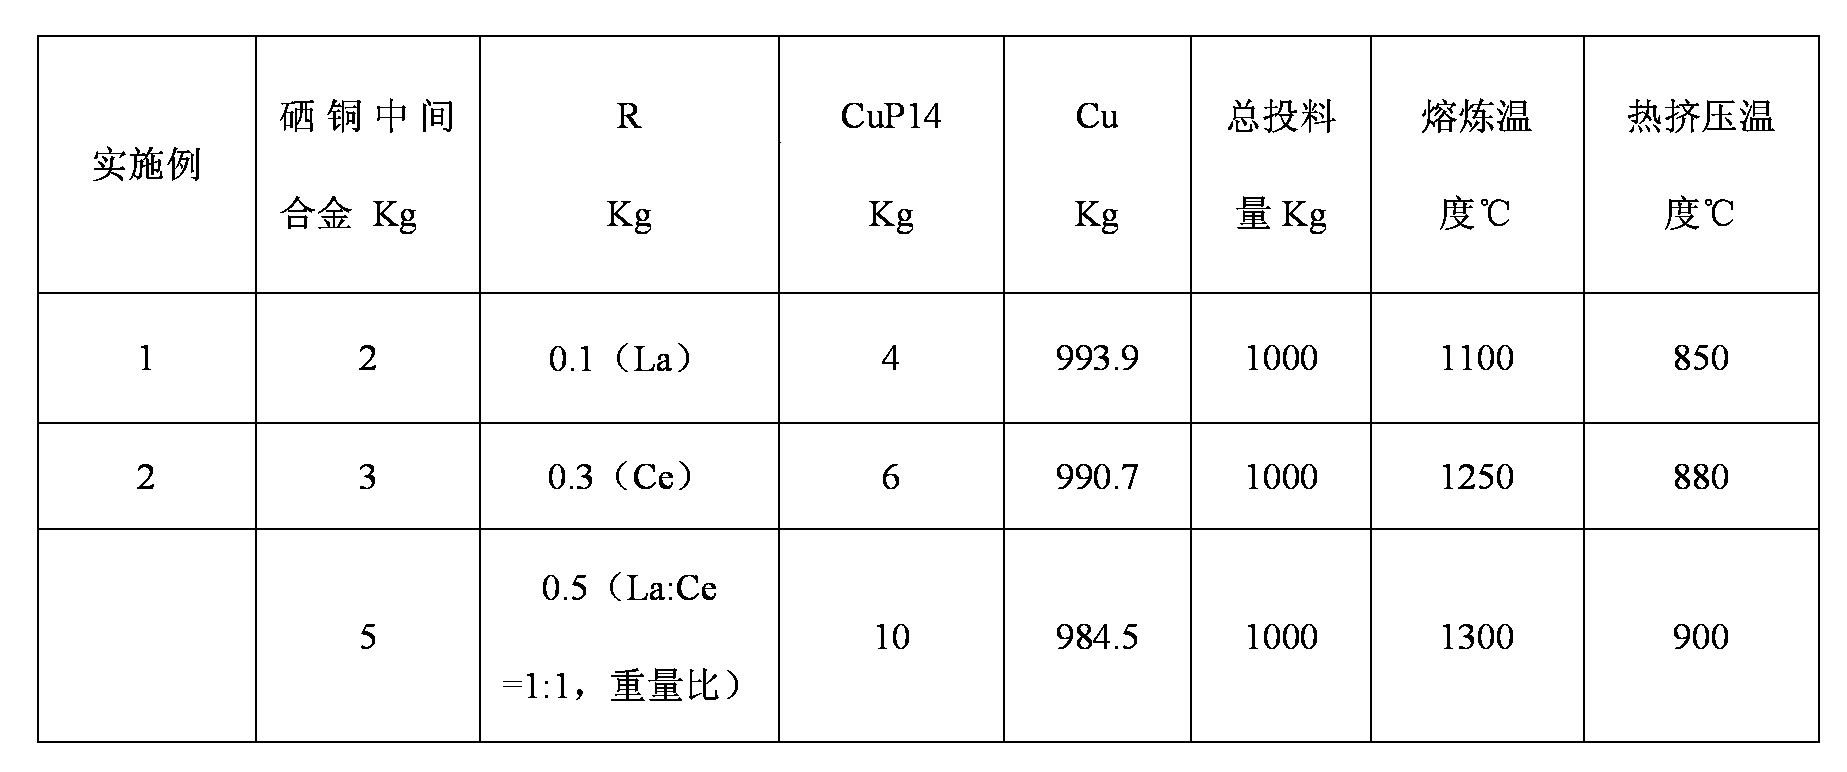 Novel high-conductivity free-cutting selenium copper alloy material and preparation method thereof